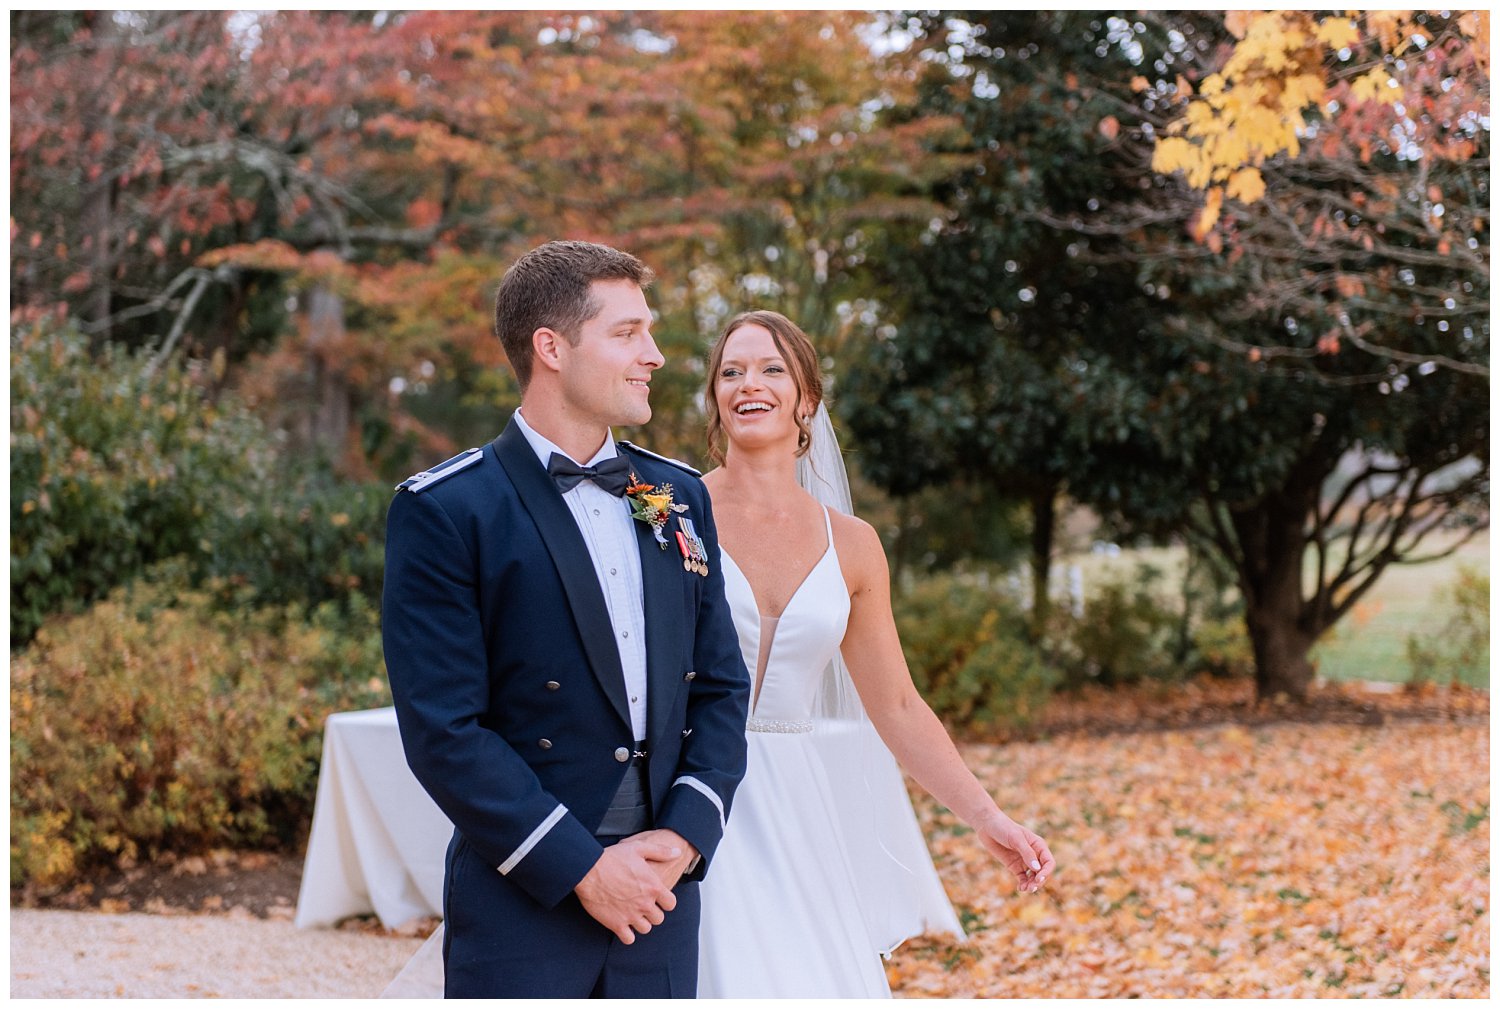 First Look at Keswick Vineyard Wedding photographed by Heather Dodge Photography